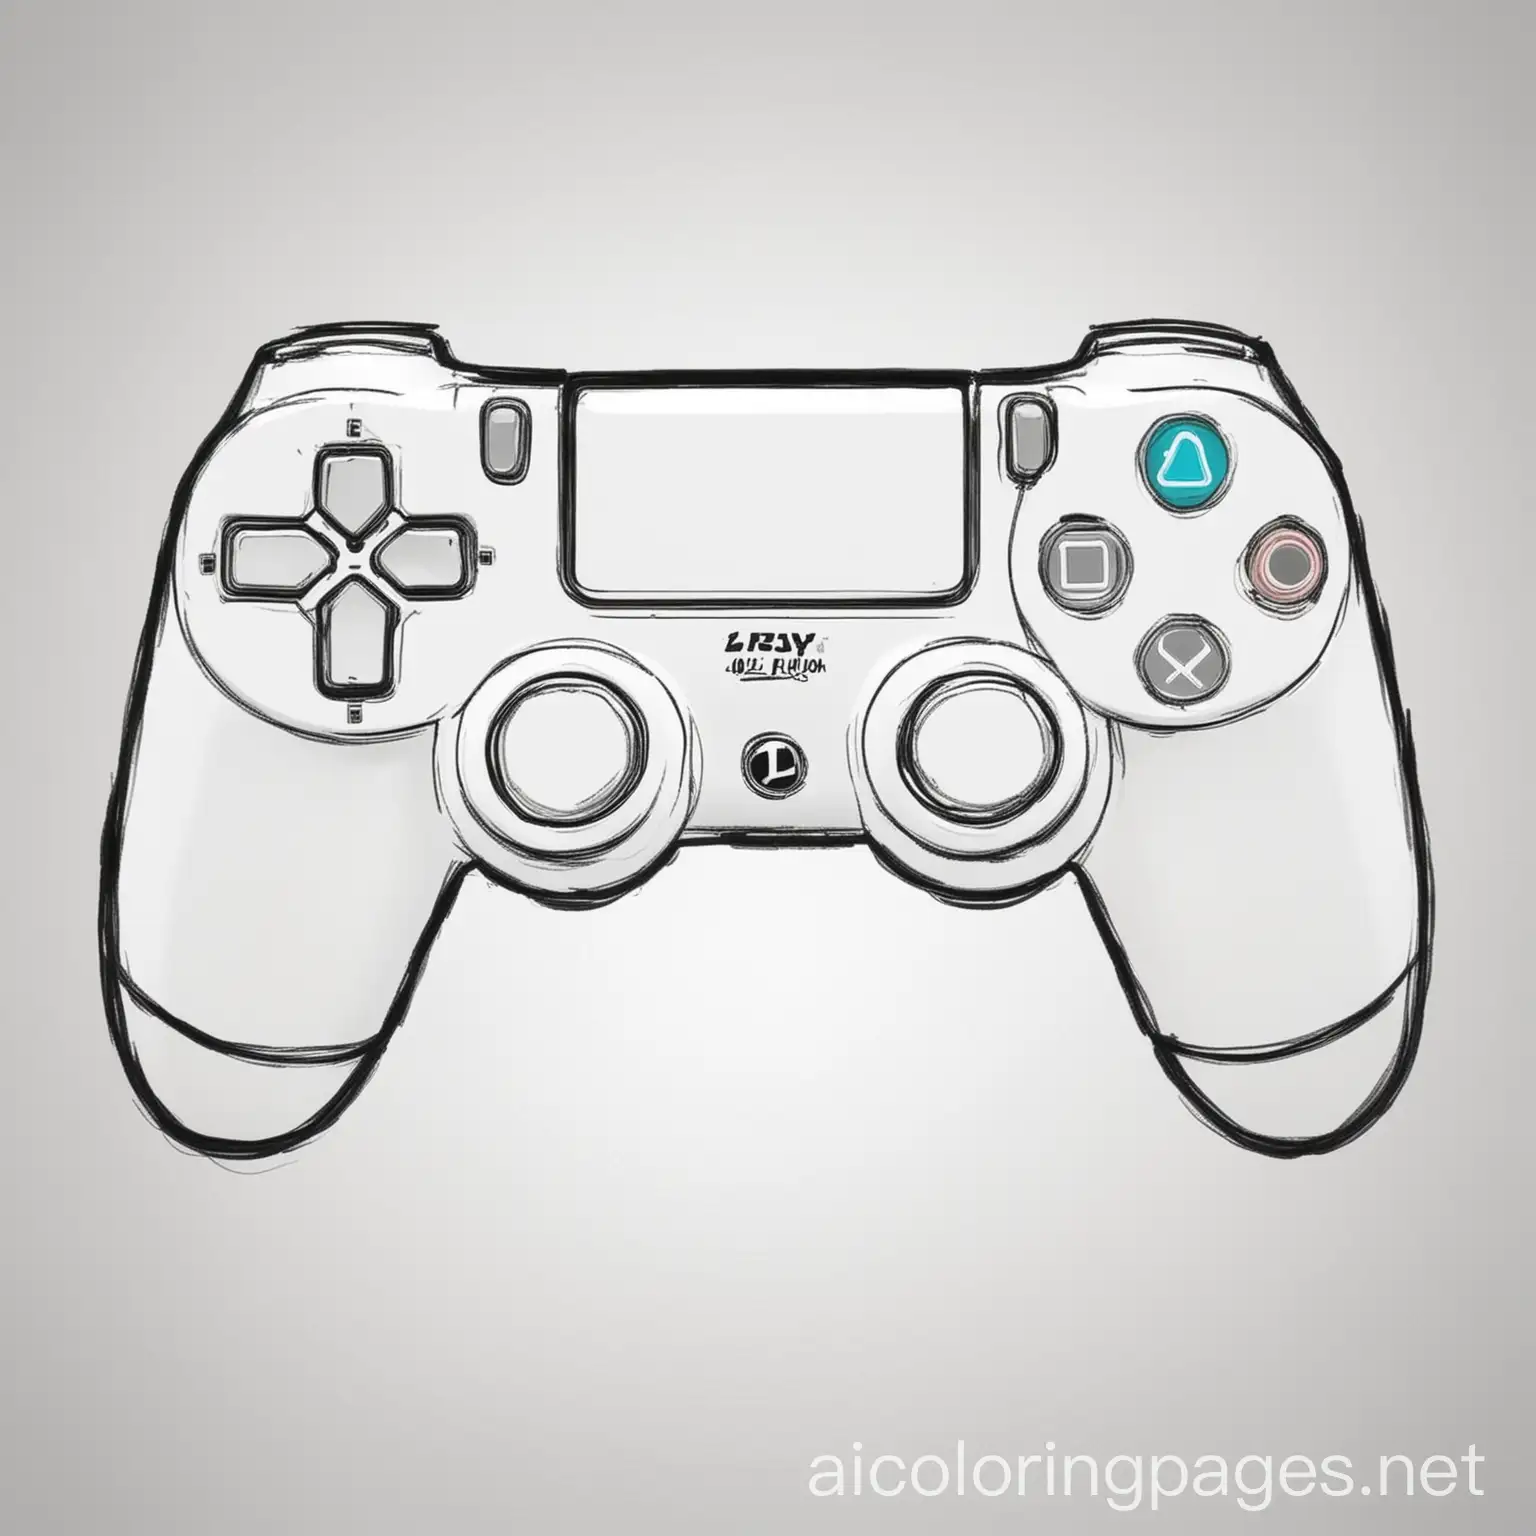 PlayStation-4-Controller-Coloring-Page-Black-and-White-Line-Art